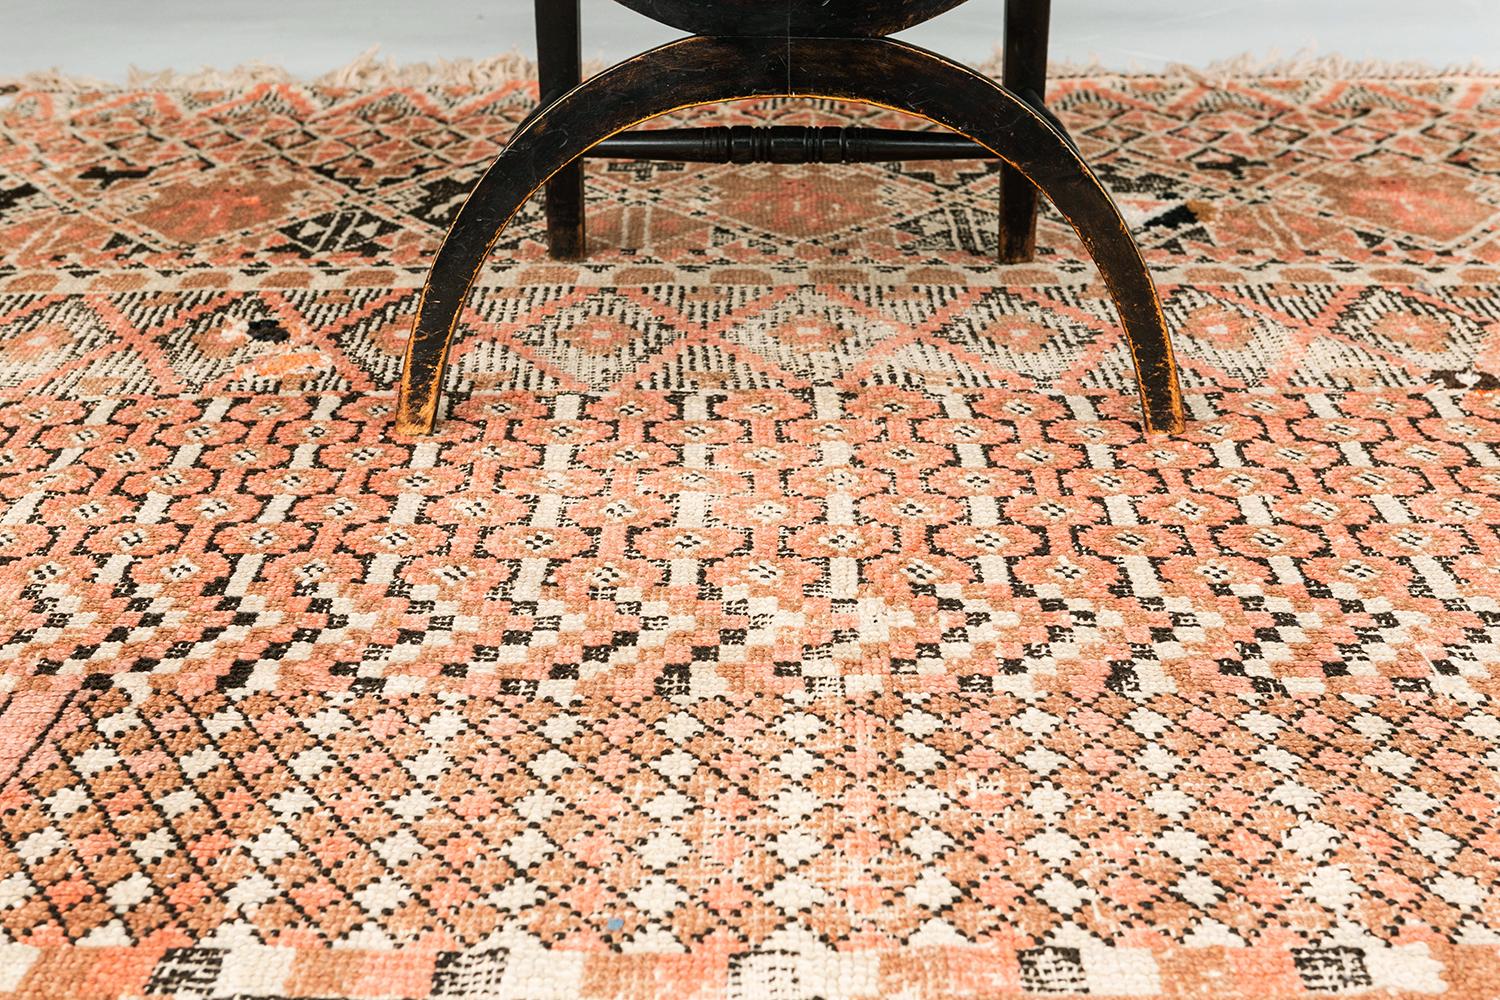 An antique Moroccan Beni M'Guild in beautiful coral, brown, and ivory. This wool pile weave is from the northern Middle Atlas Mountains of Morocco. The Beni M'Guild tribe is also known for their tone-on-tone designs with geometric patterning. This